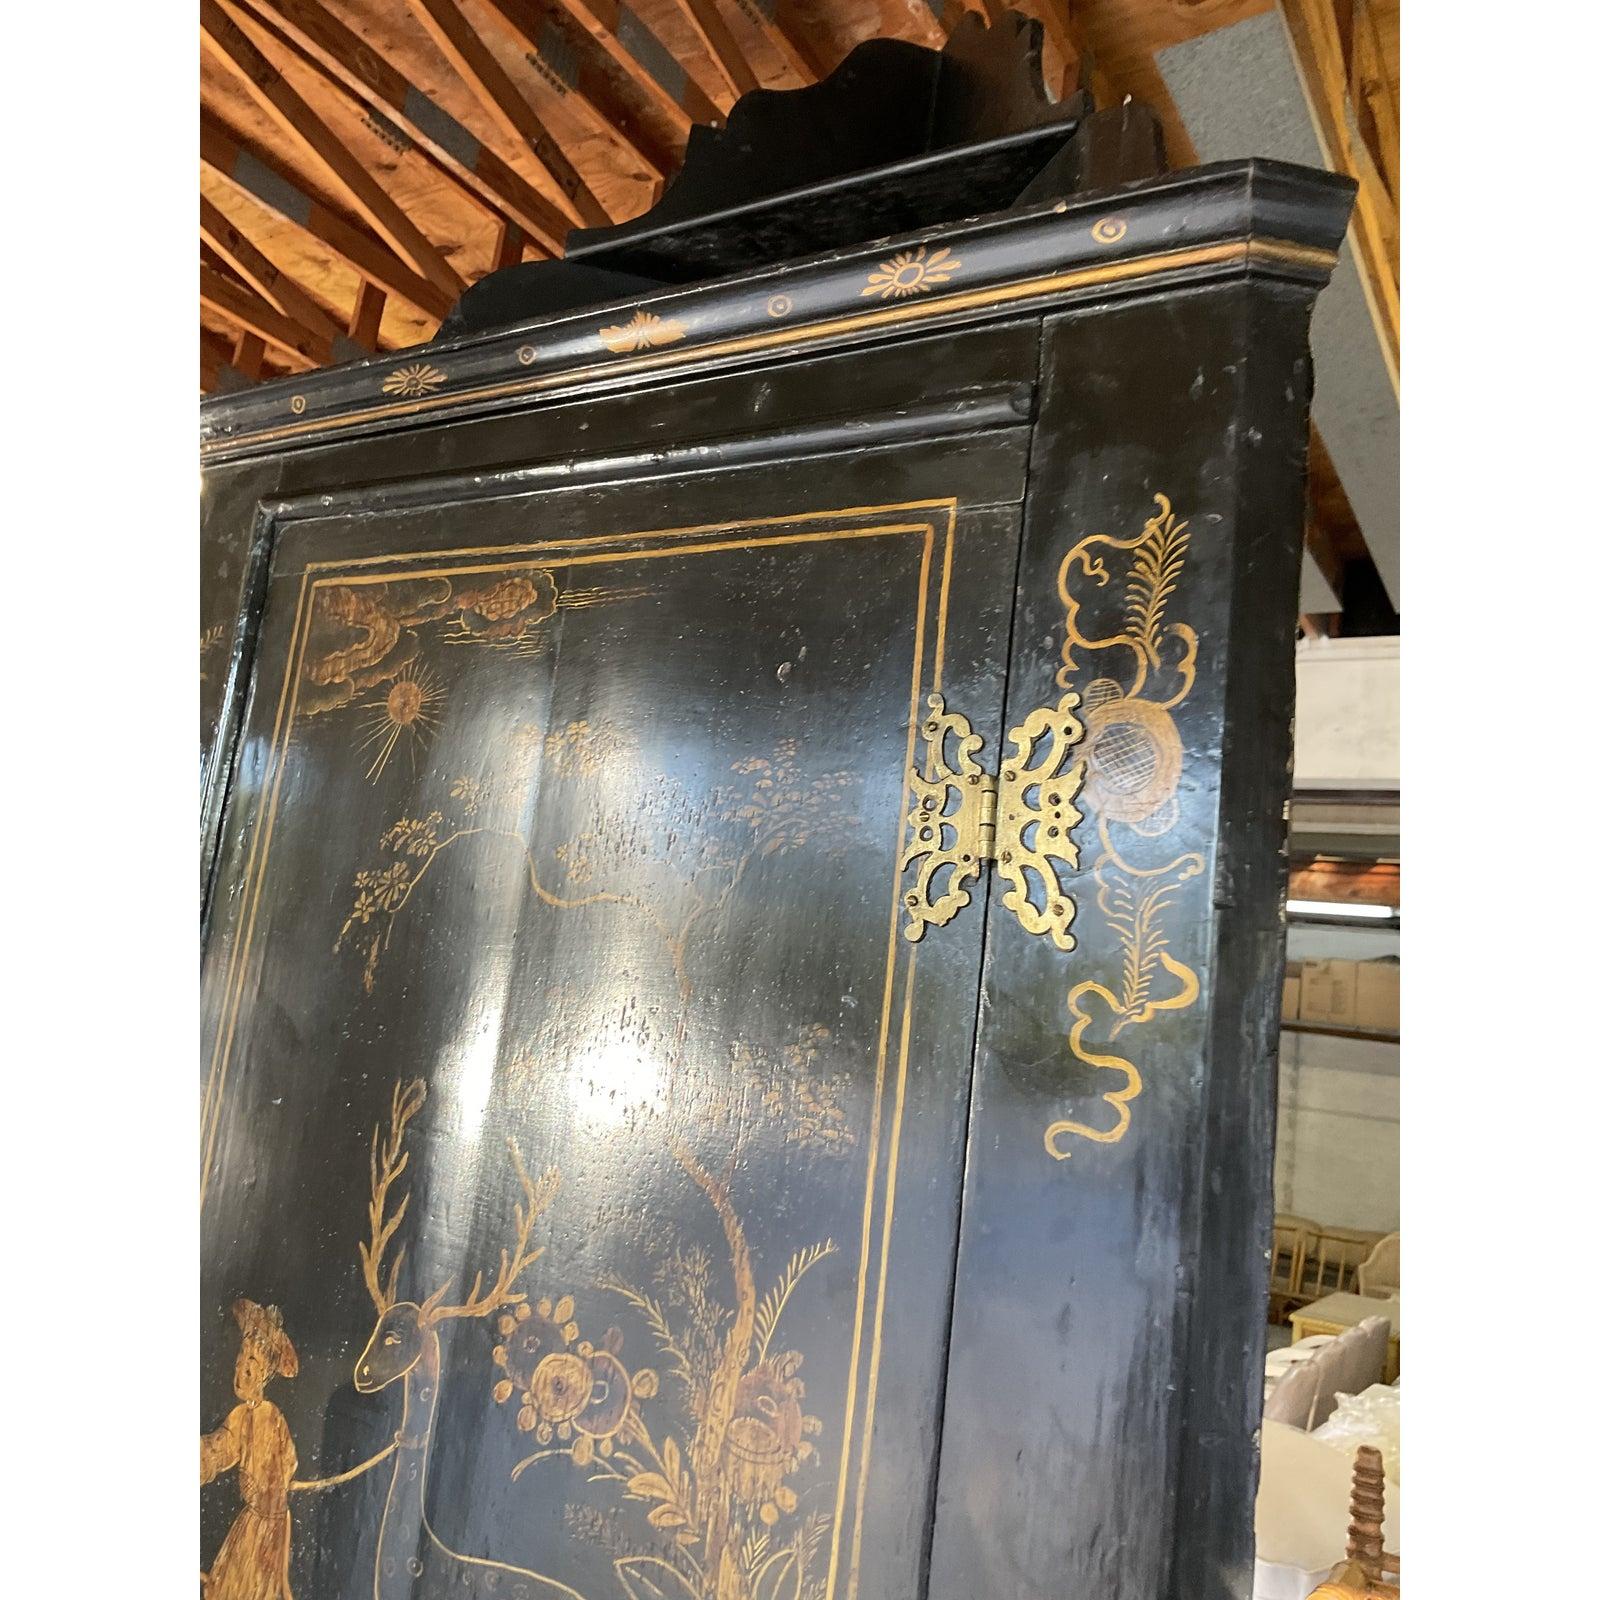 Incredible vintage Chinoiserie corner cabinet. Beautiful gold pastoral scenes on a glassy black background. Easily hung on the wall or also gorgeous just resting on a table top. Super chic. Acquired from a Palm Beach estate.